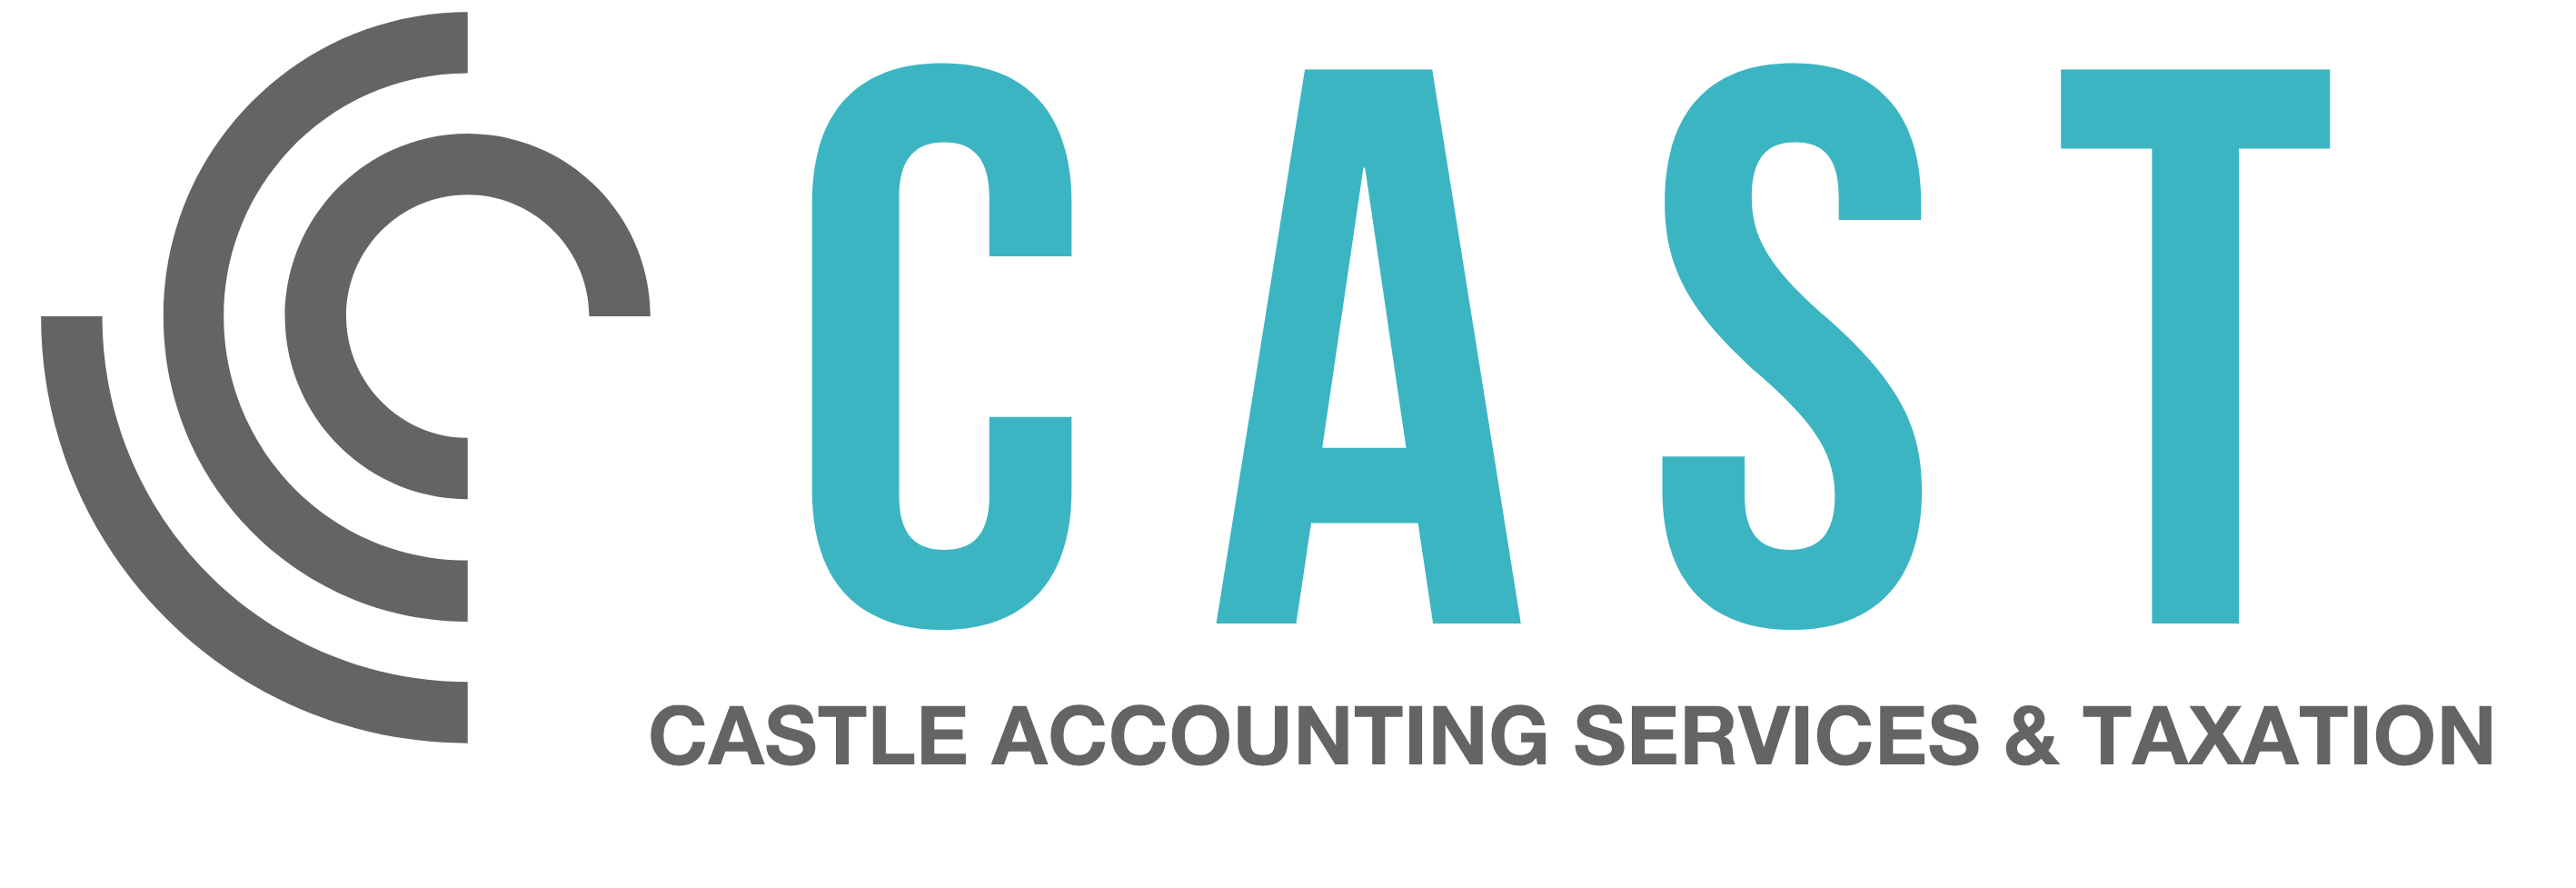 Castle Accounting Services & Taxation